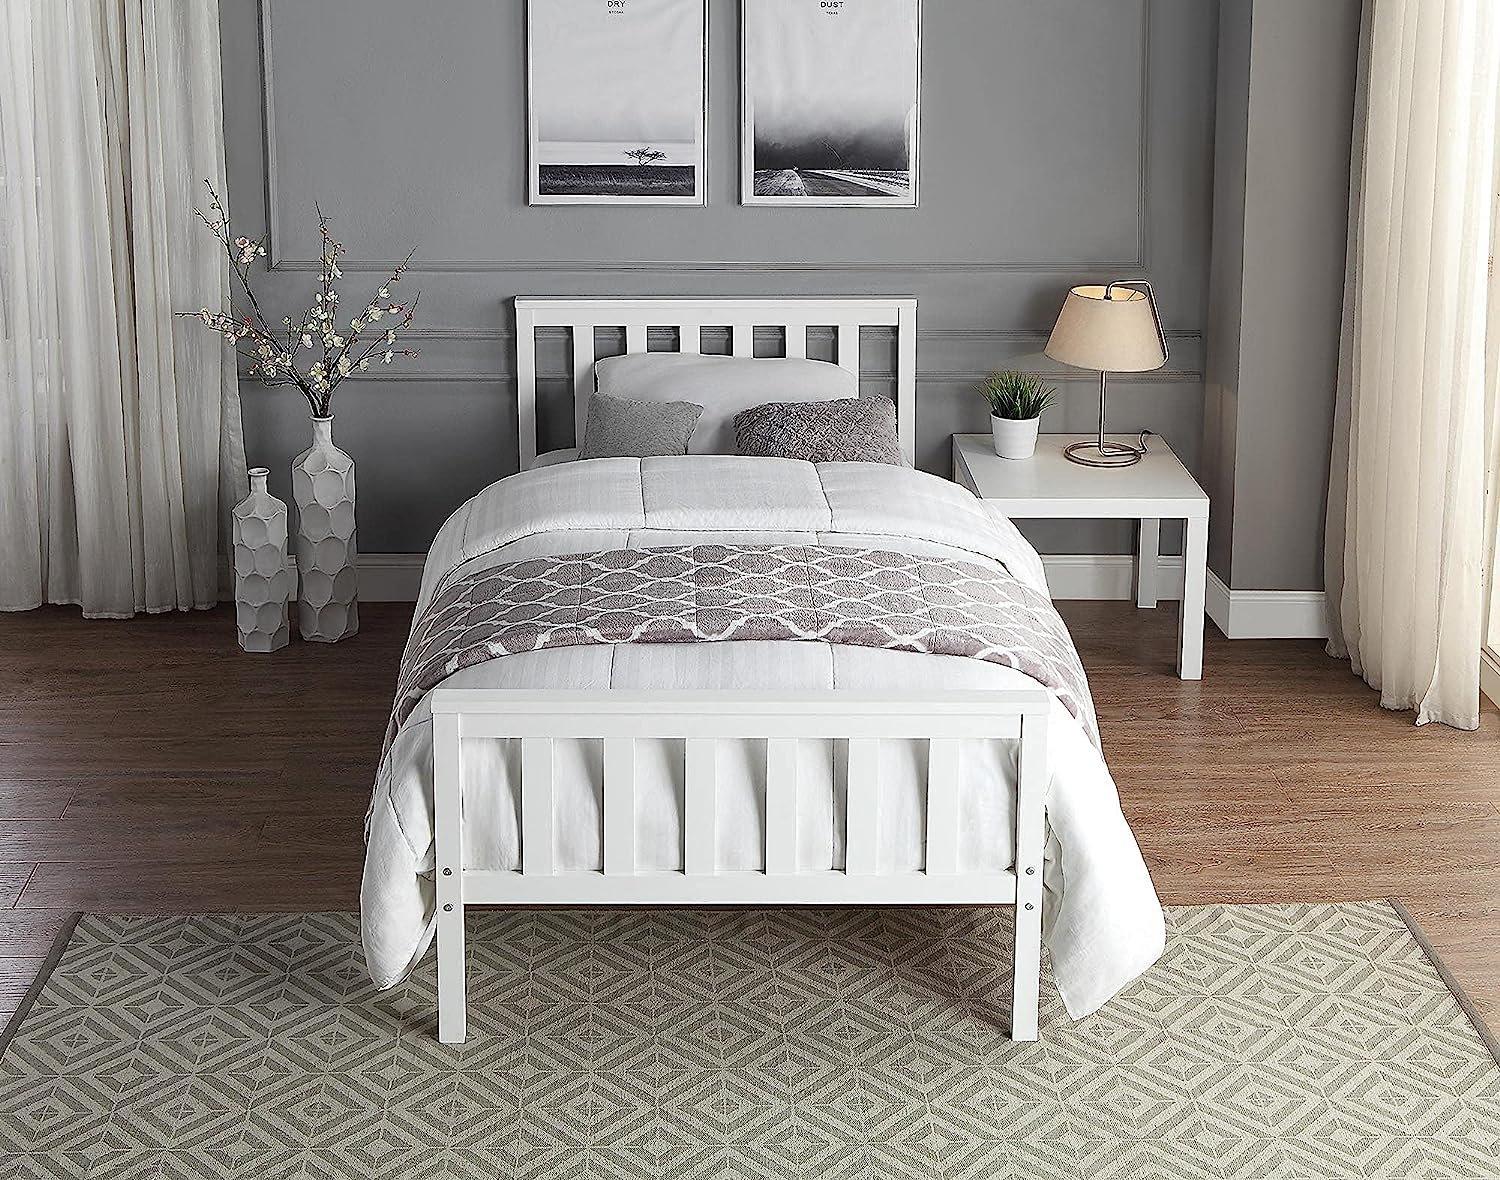 Single Wooden Bed Frame White 3ft With Memory Foam Mattress